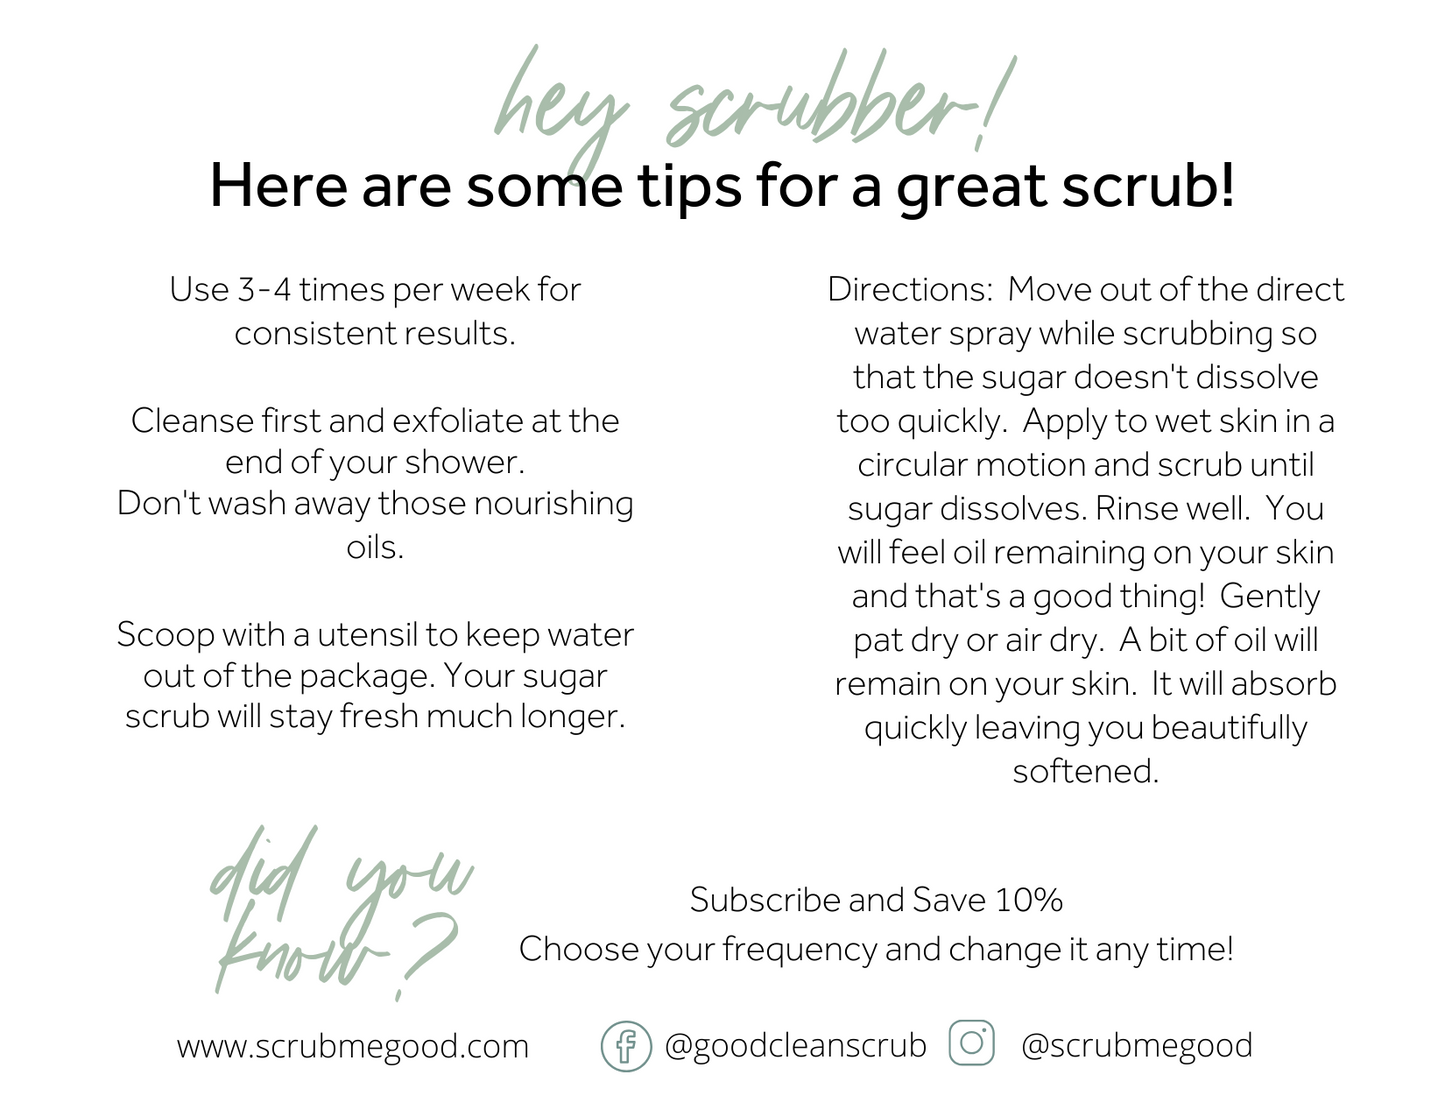 UPDATED Tips for a Great Scrub Cards - Postcard Size (Pack of 6)